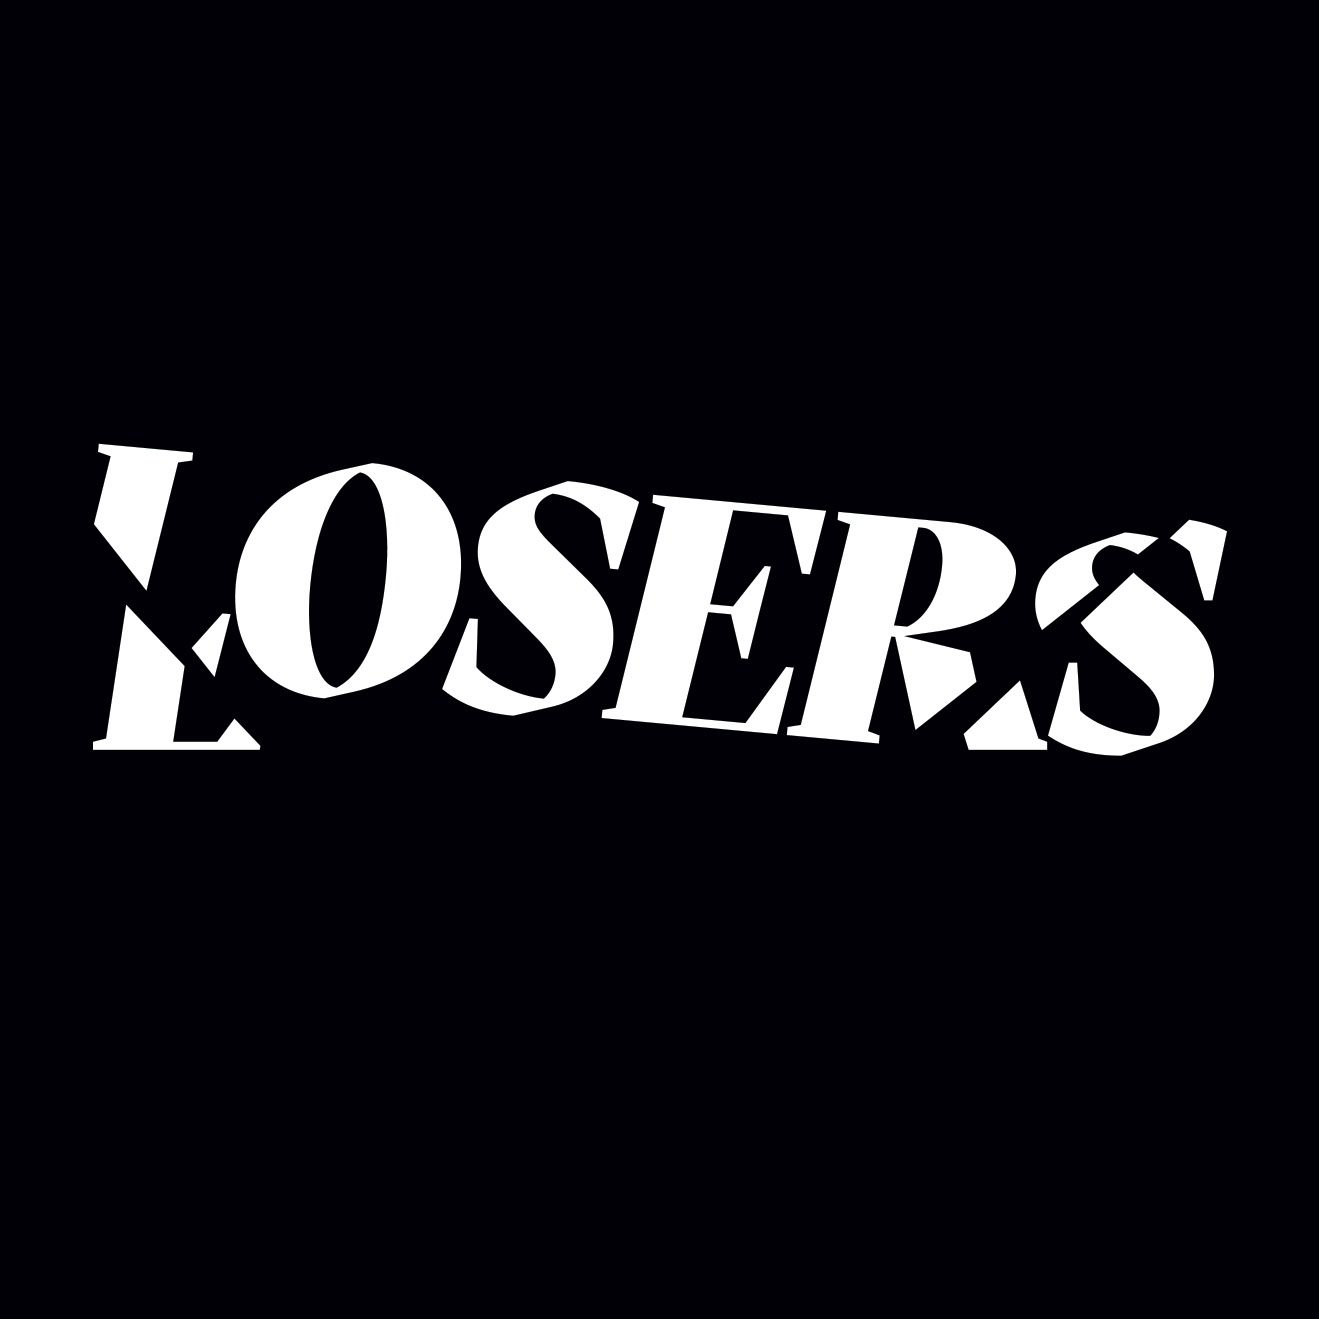 Losers: An essay about politics, humility, and loss - Freud Museum London